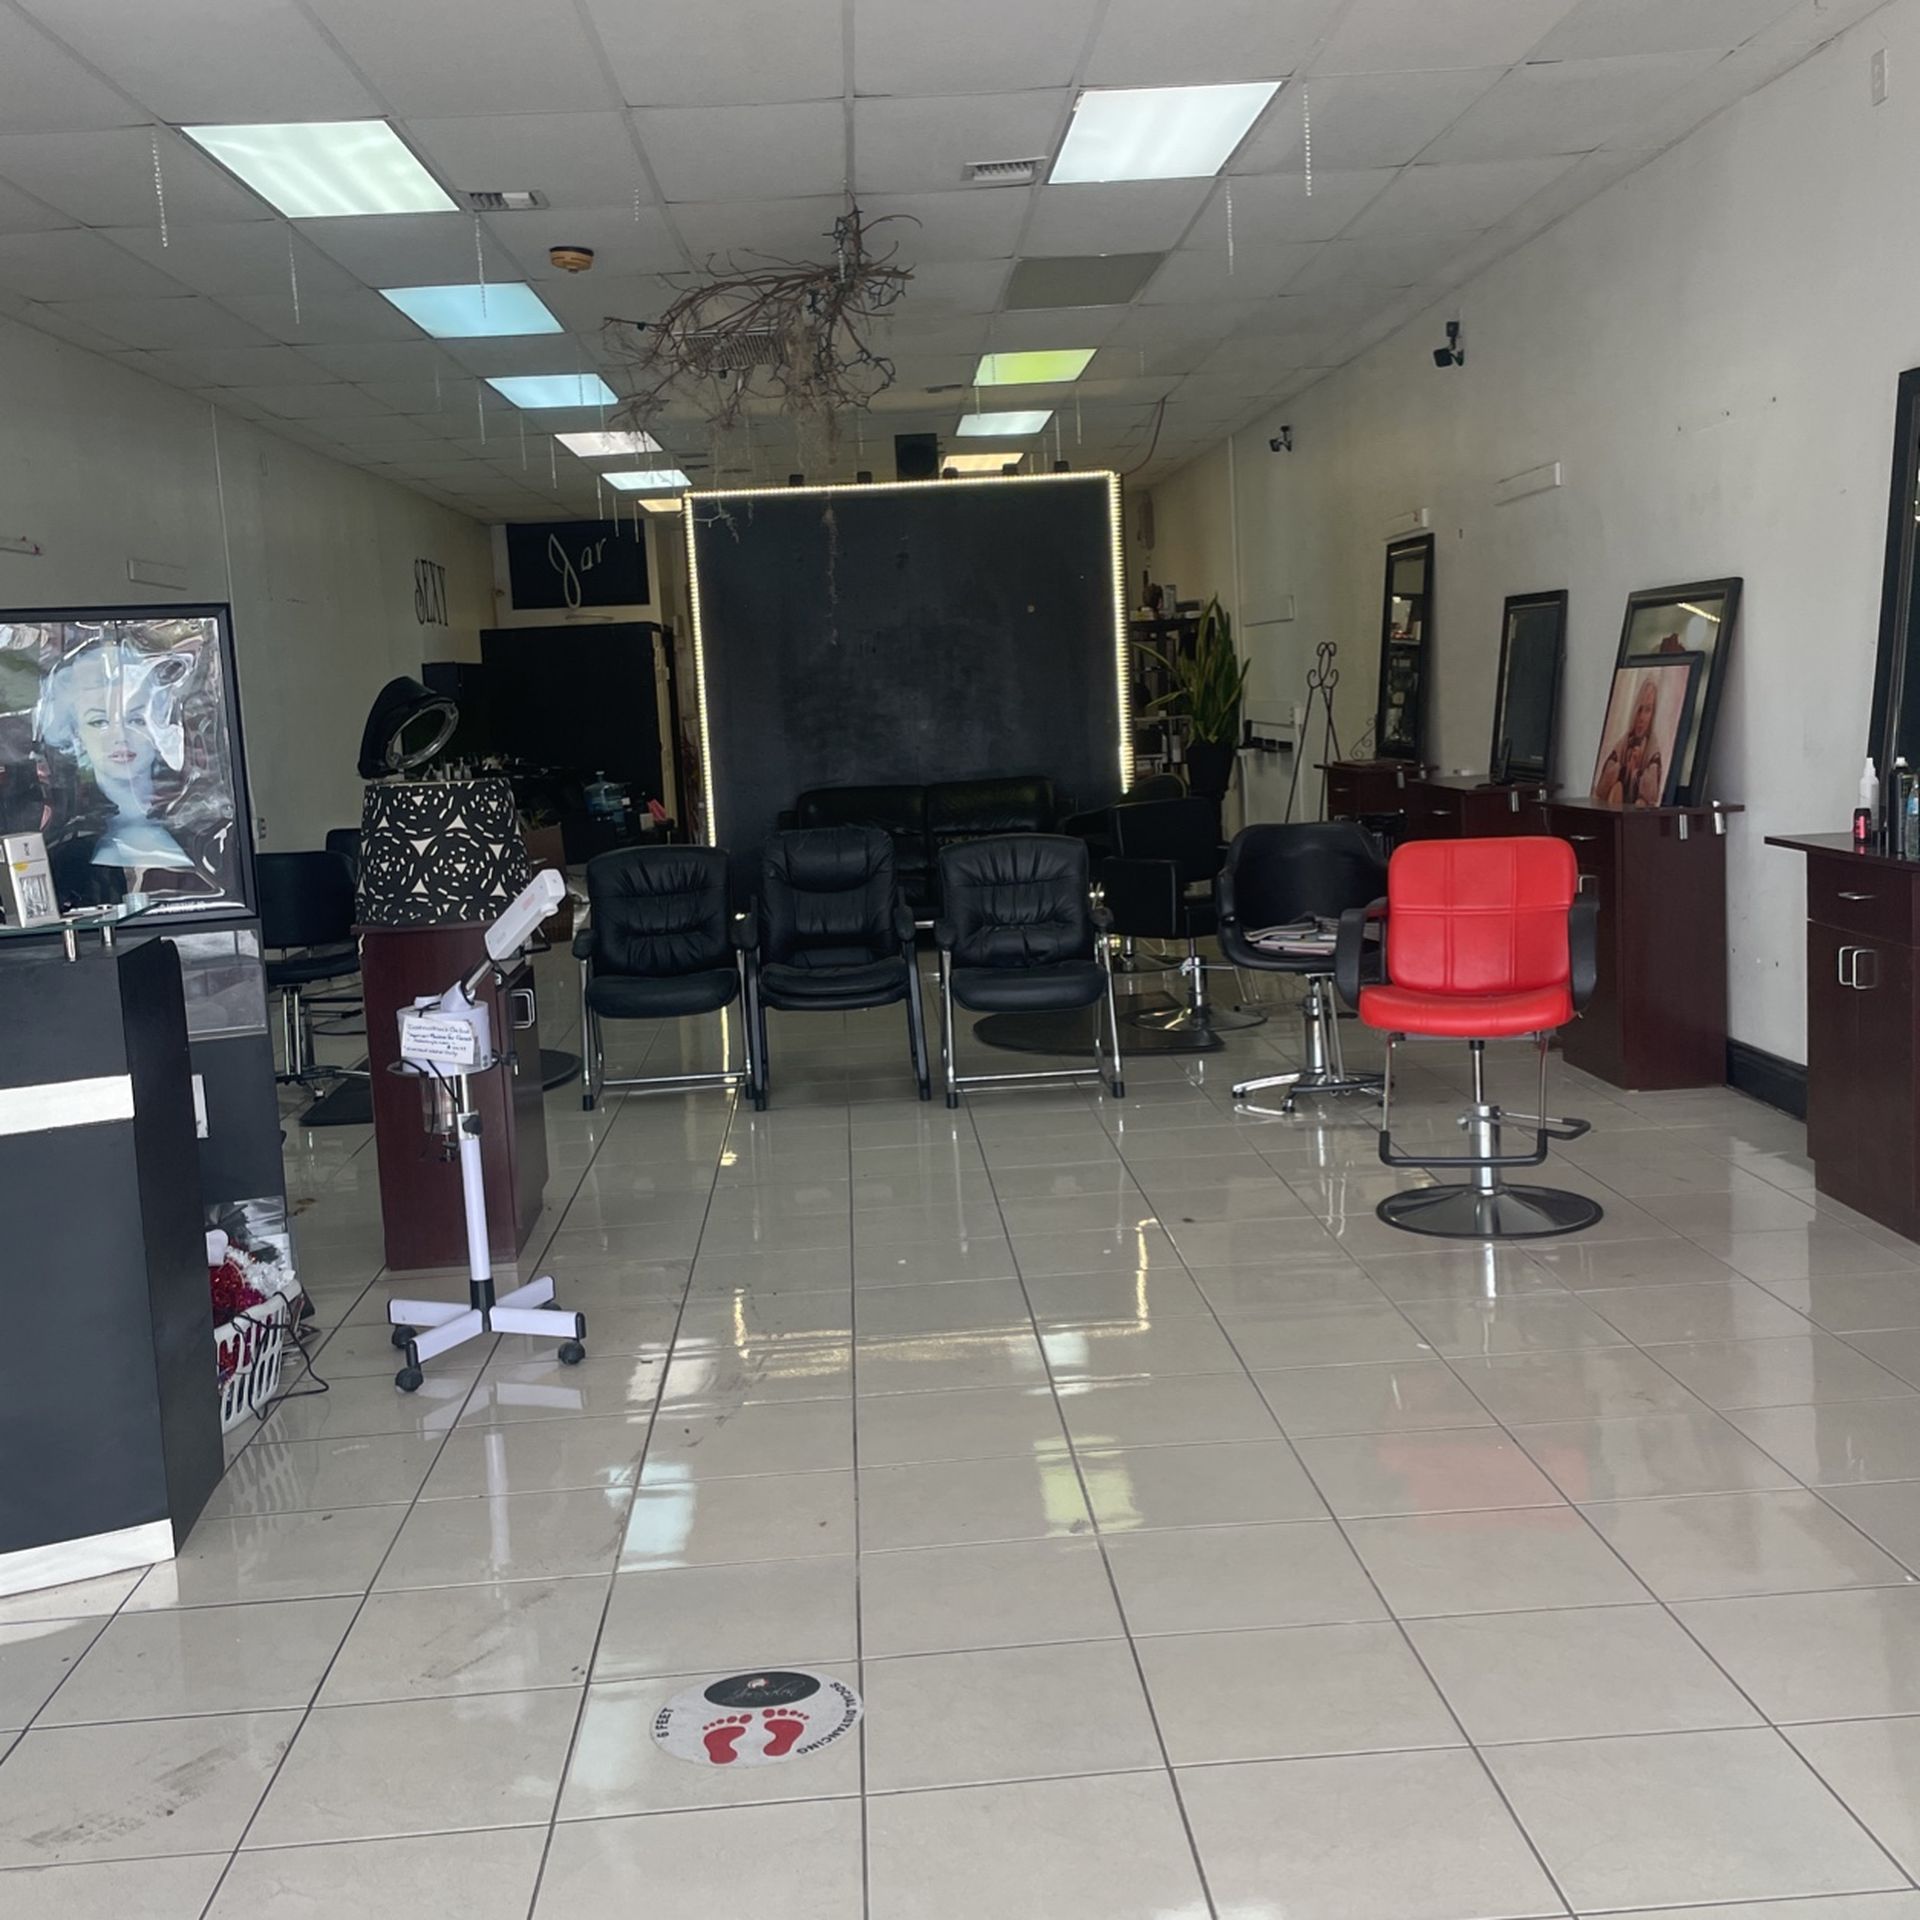 Hair Salon Set Up For Sale $30 And Up